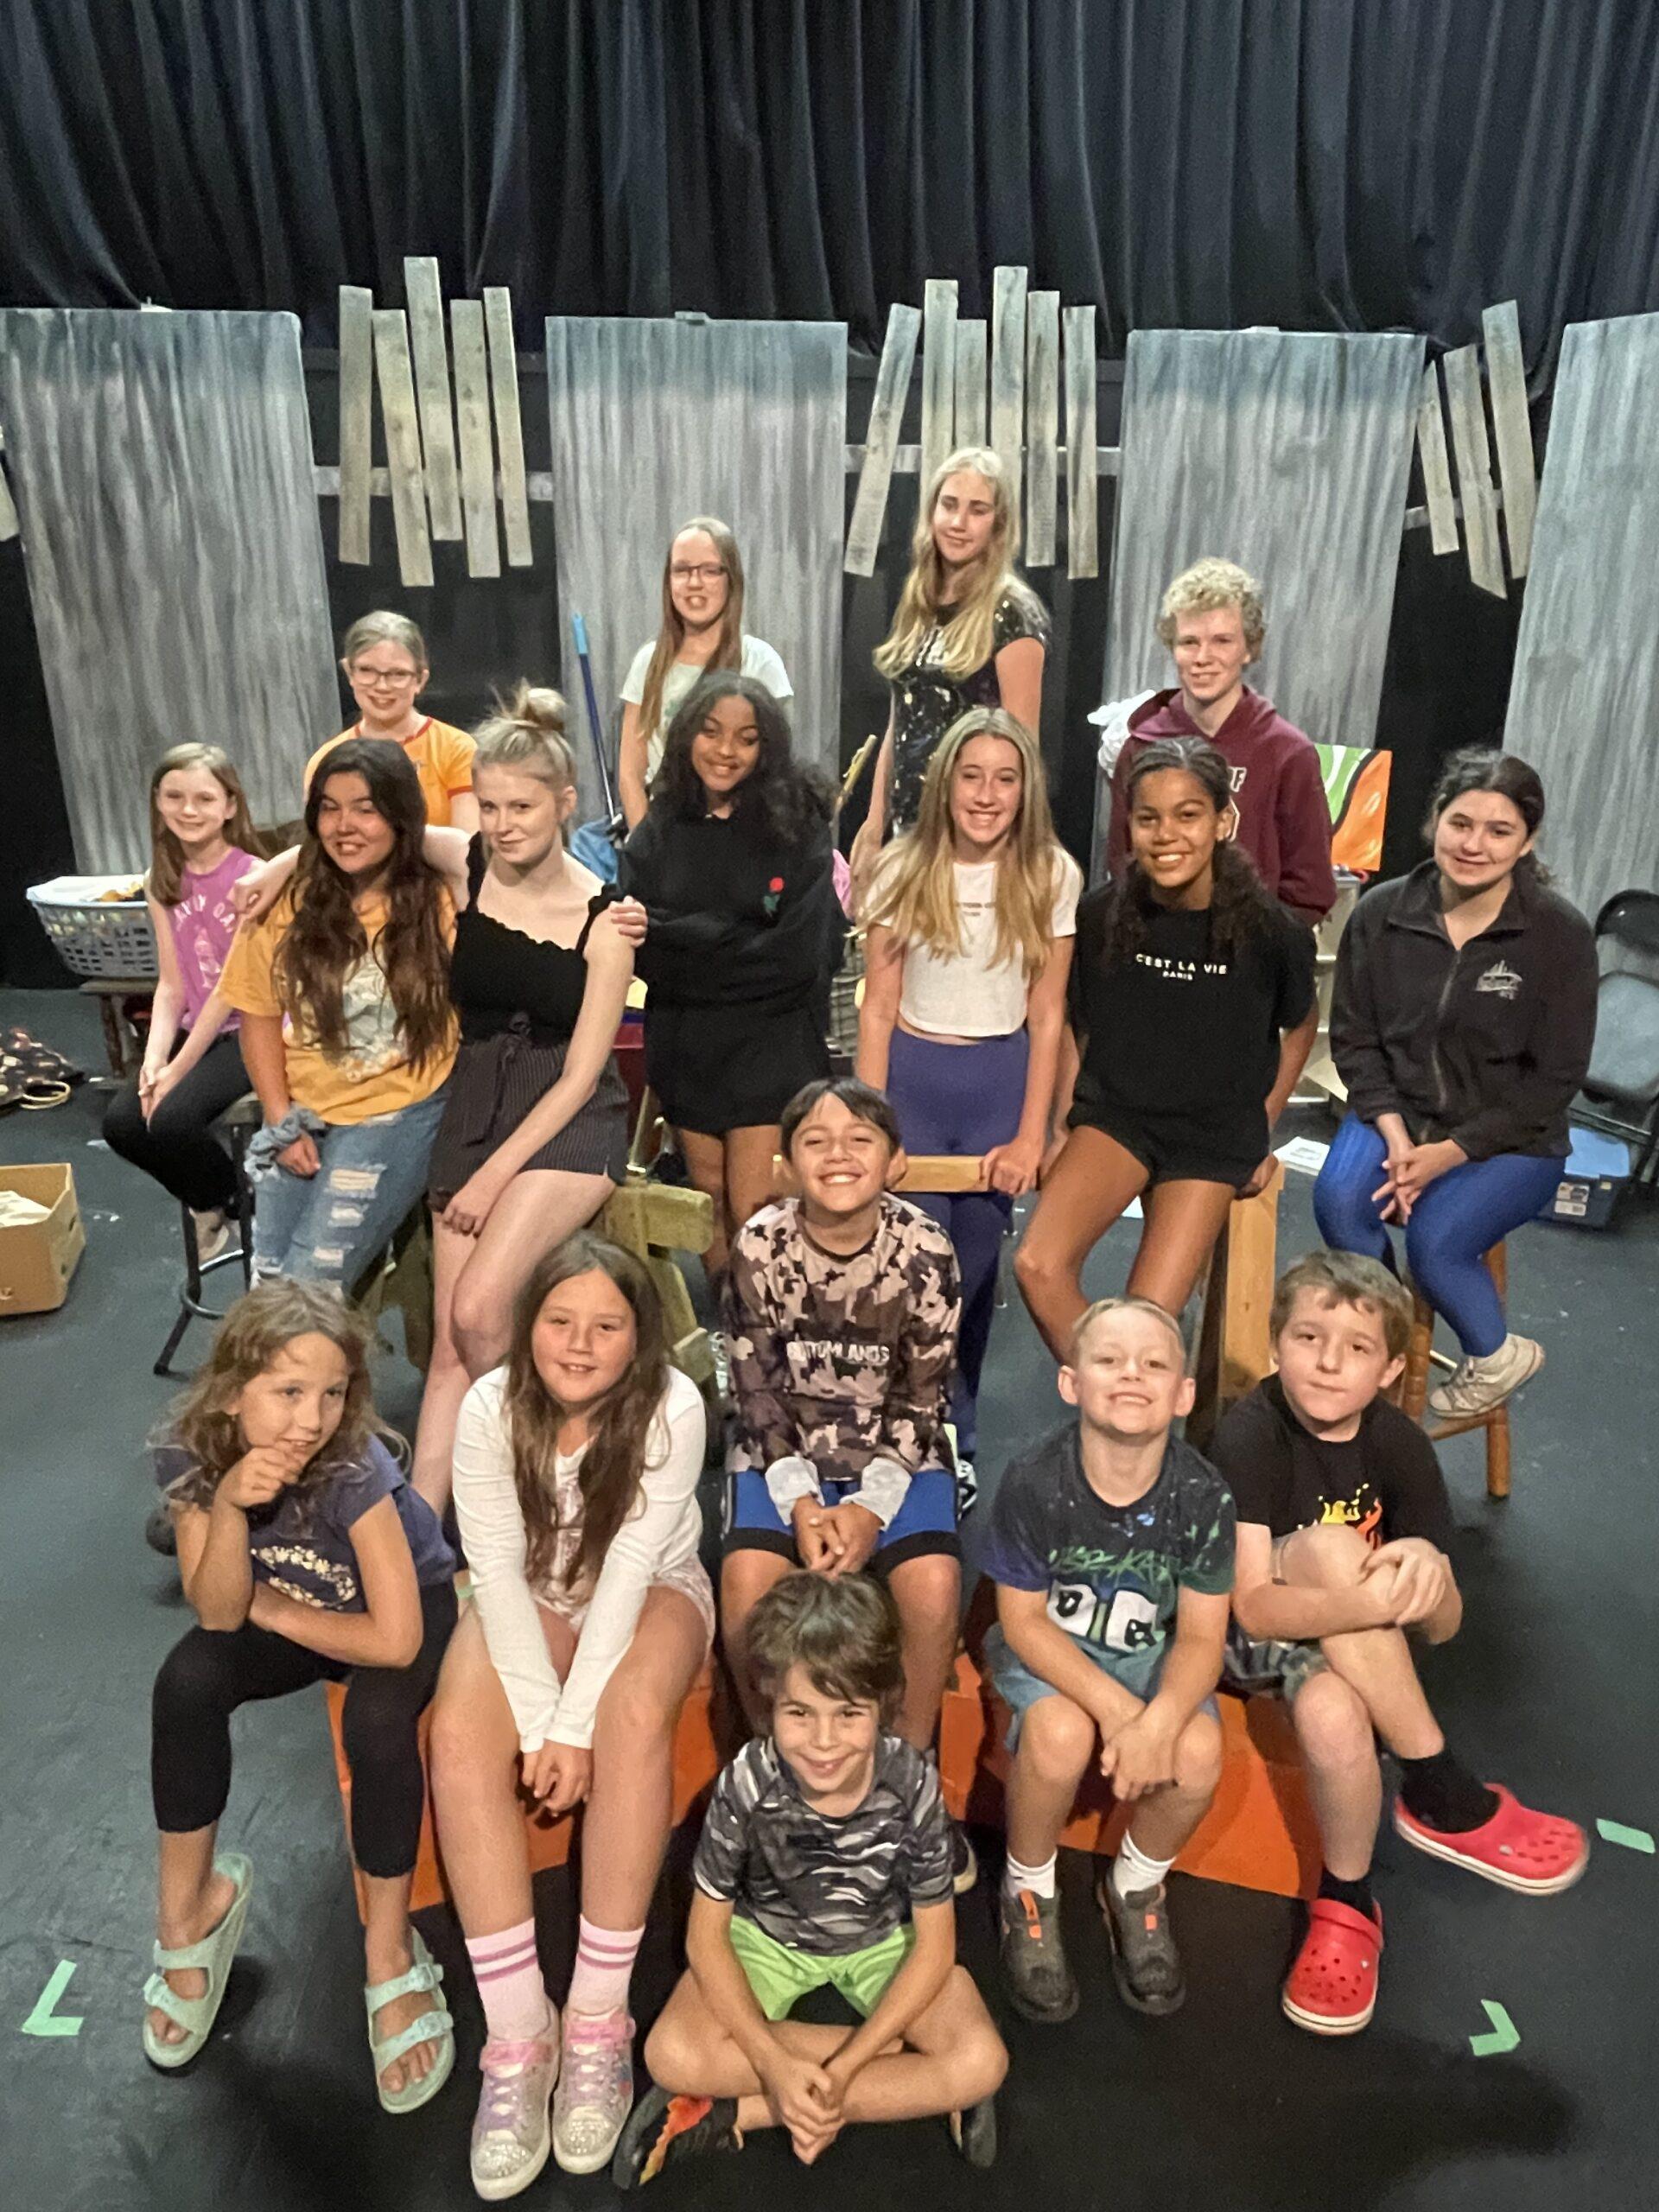 Youth theatre - The cast of the Grey Wellington Theatre Guild summer youth production, Spirited!, includes, from left: front, Kensington Bray-Dunning; second row Paisley Forester, Violet McLaughlin, Luca Sicilia, Tristan Lawrie, William Browley; third row, Ebbony Moroz, Abby Rogers, Quiana Sargeant, Sophia Sicilia, Lexi Drummond, Madison Rogers; back, Adelaide Forester, Lydia Dirksen and Blair Cowan. Absent for photo: Ellie Bowman and Keniah Sargeant.